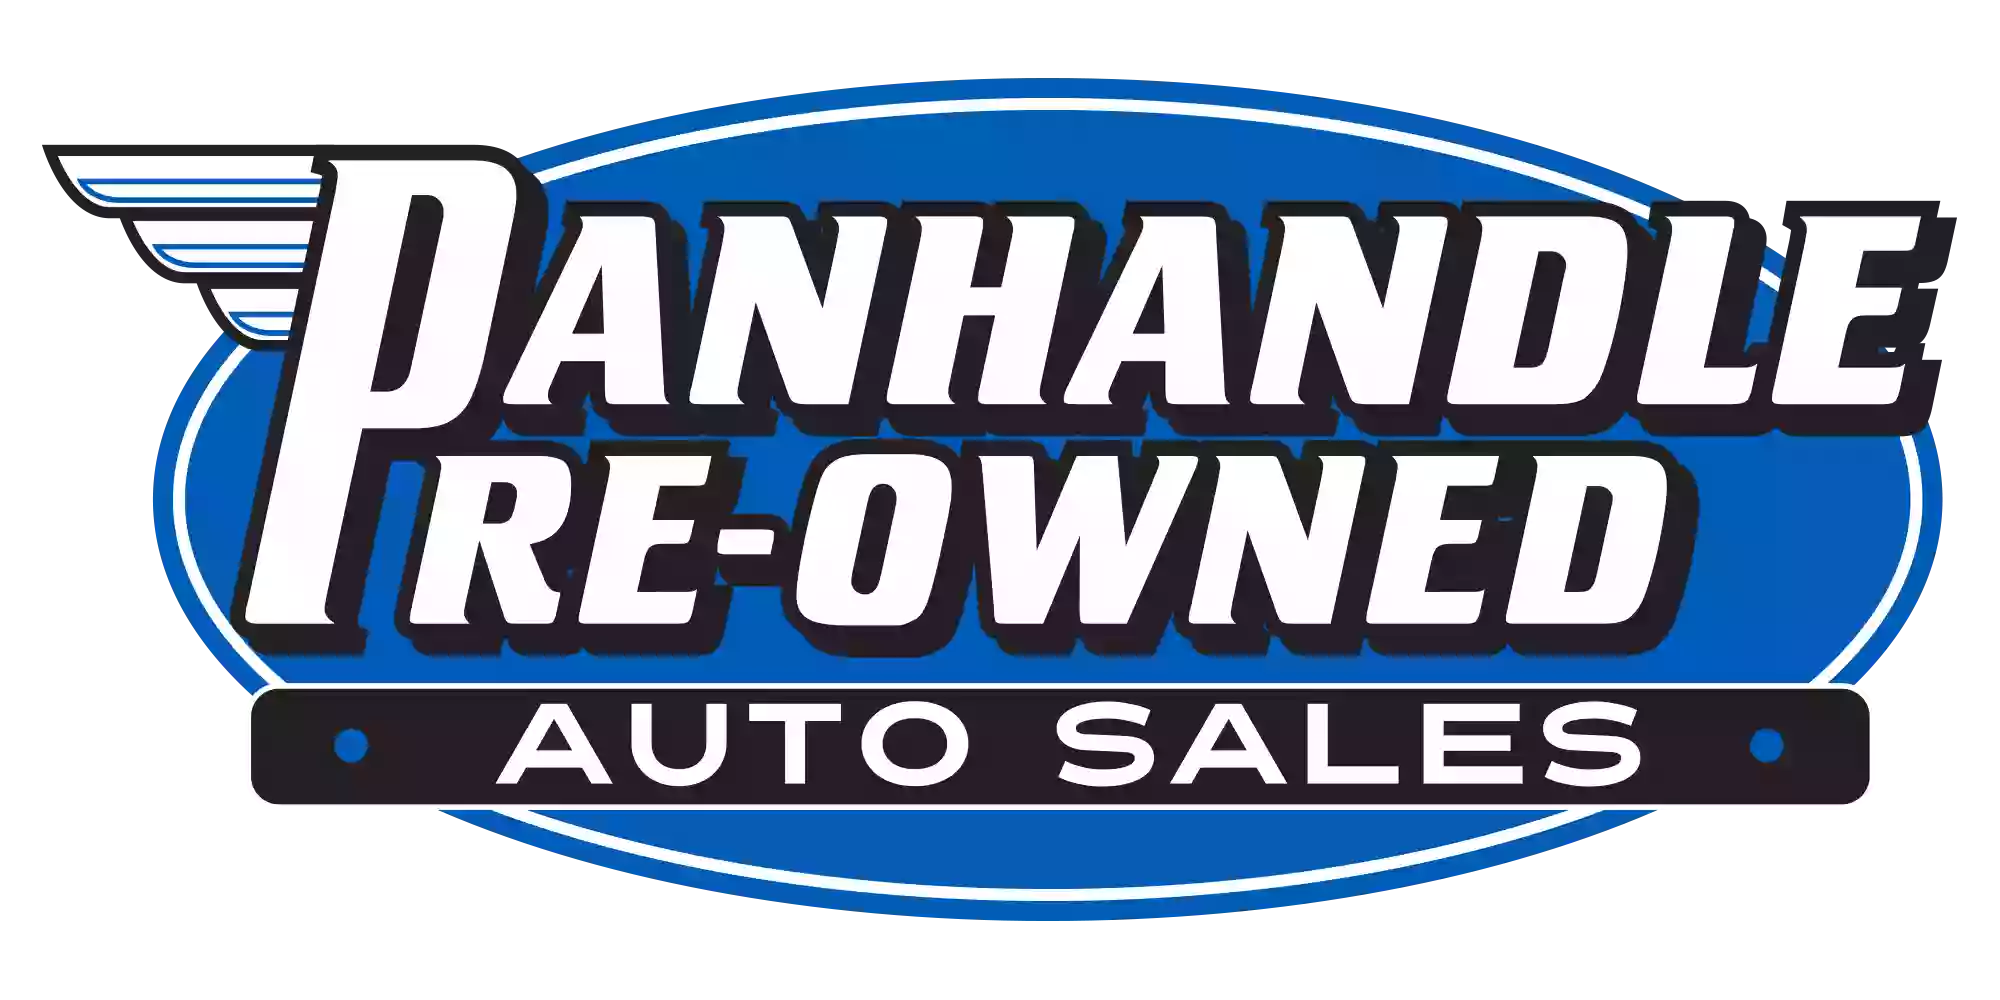 Panhandle Pre-Owned Autos